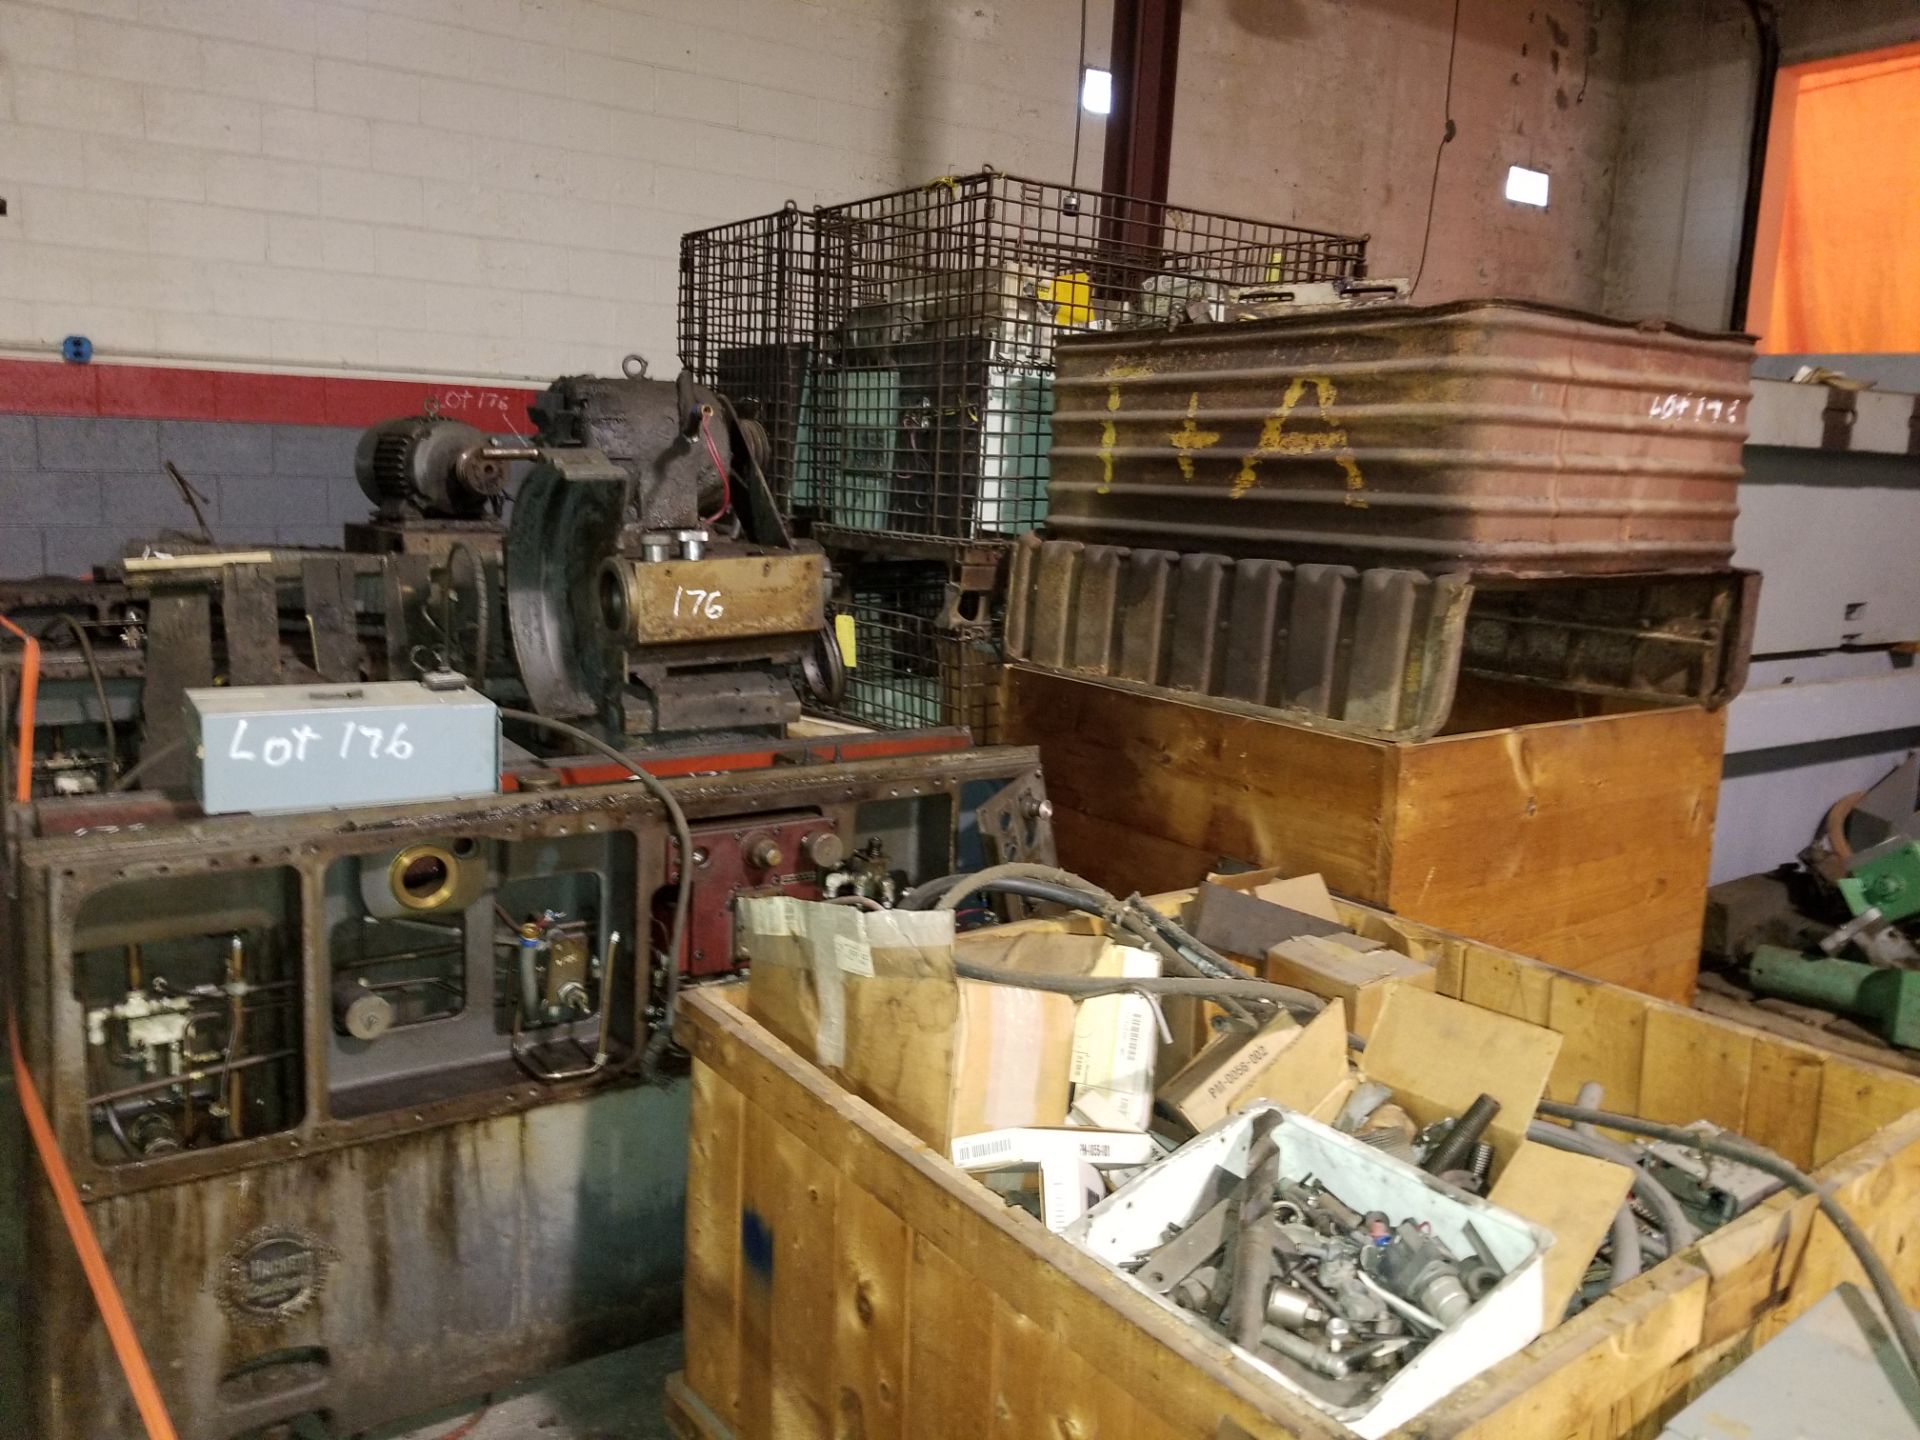 3 ct. Landis 1R Beds, 16 ct. Landis 1R Head Stock Castings & 4 Metal Bins with Misc. Parts - Image 2 of 5